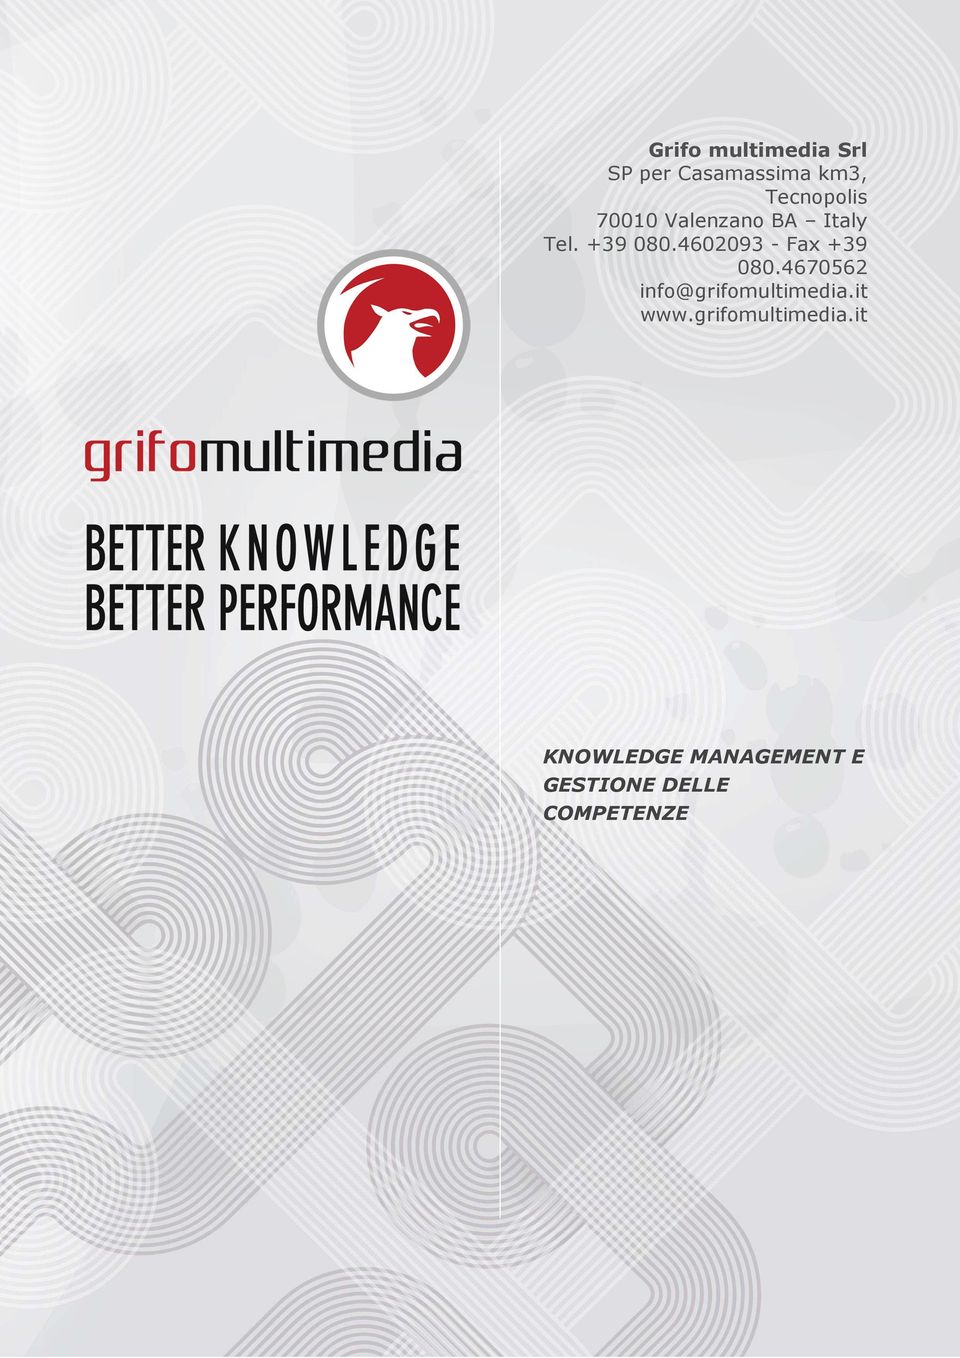 4602093 - Fax +39 080.4670562 info@grifomultimedia.